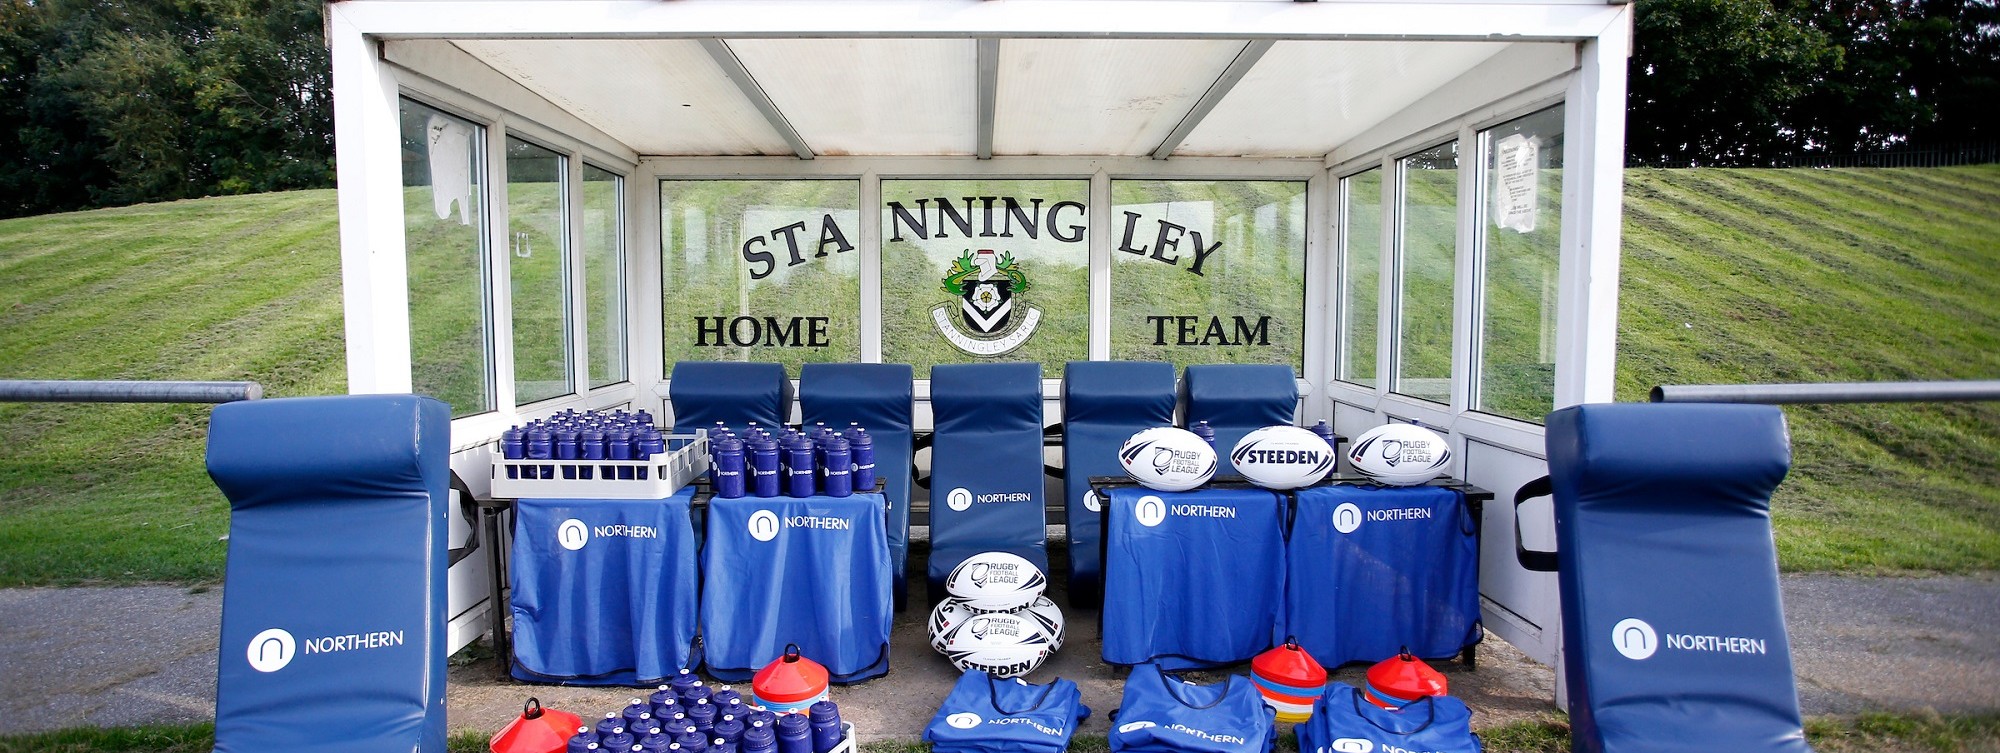 image-shows-rugby-kit-donated-by-northern